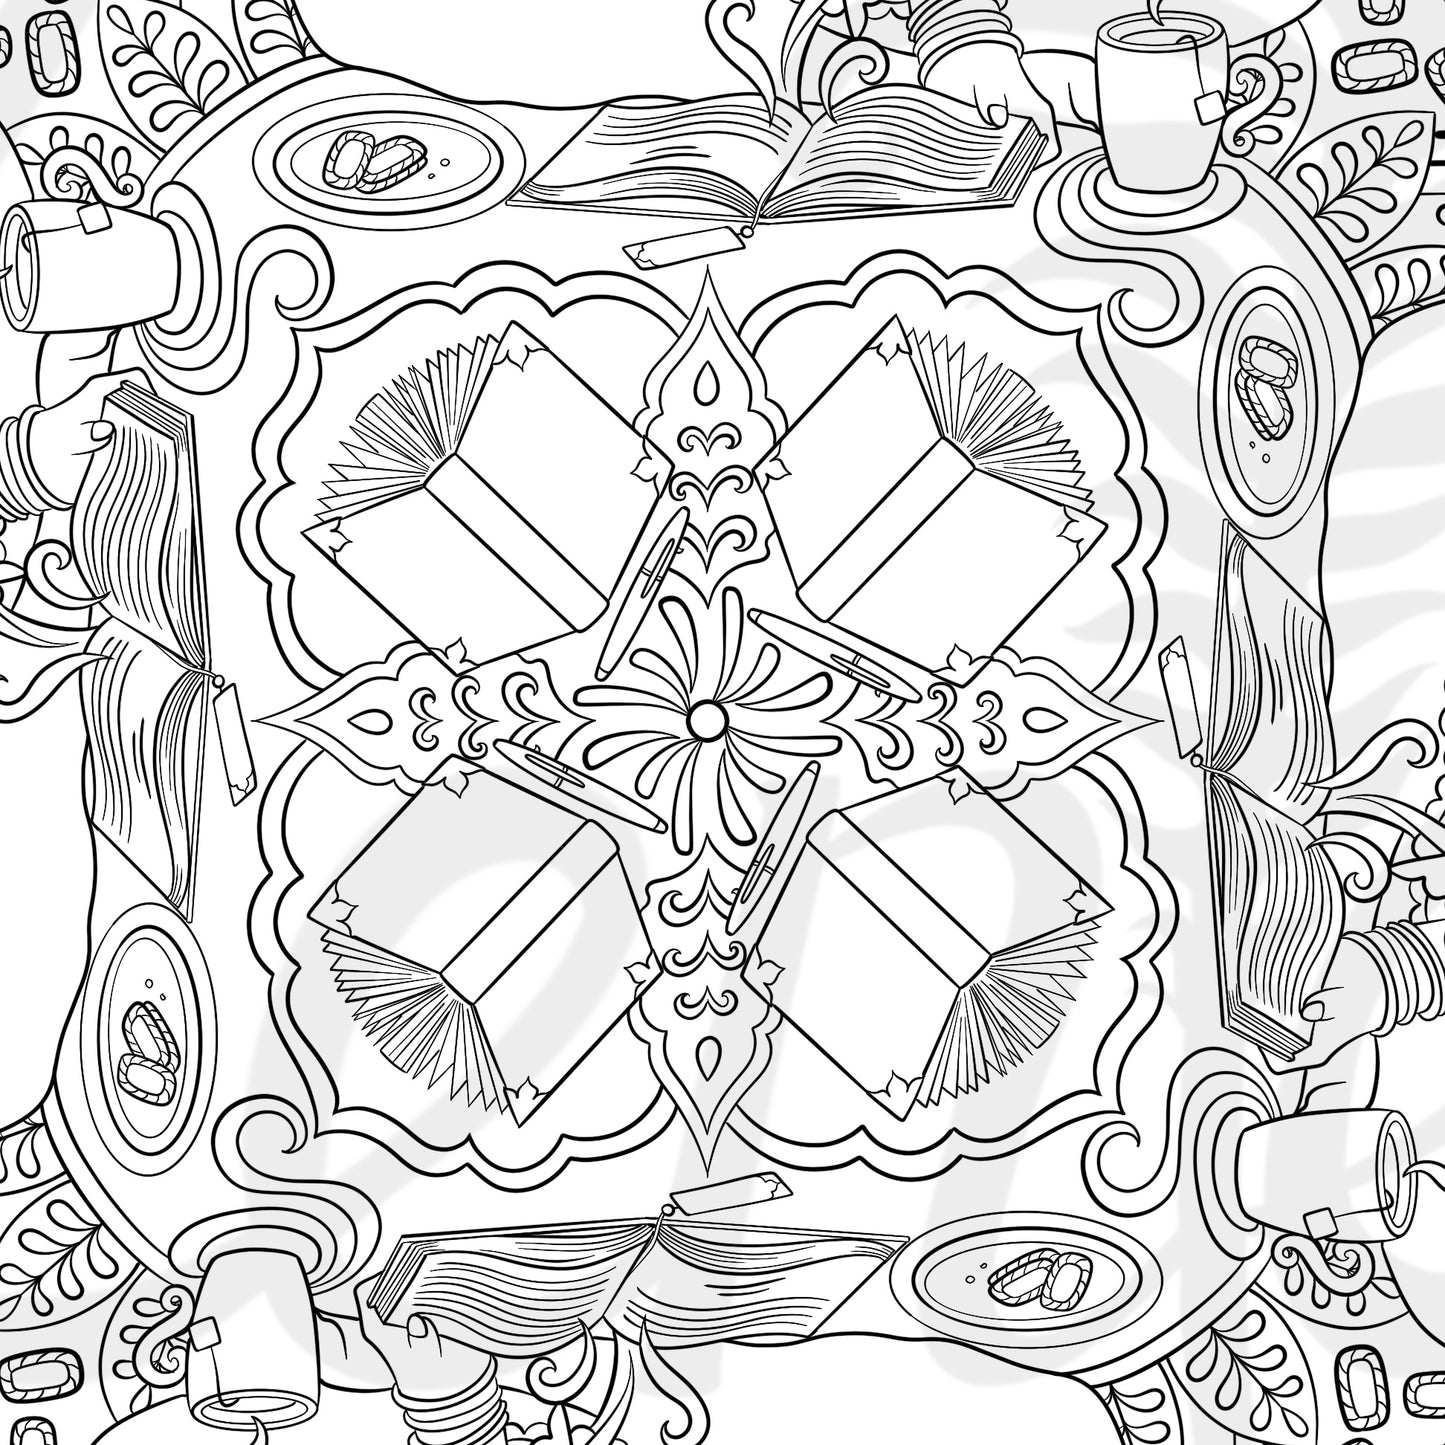 Girls Reading Books - Coloring Page